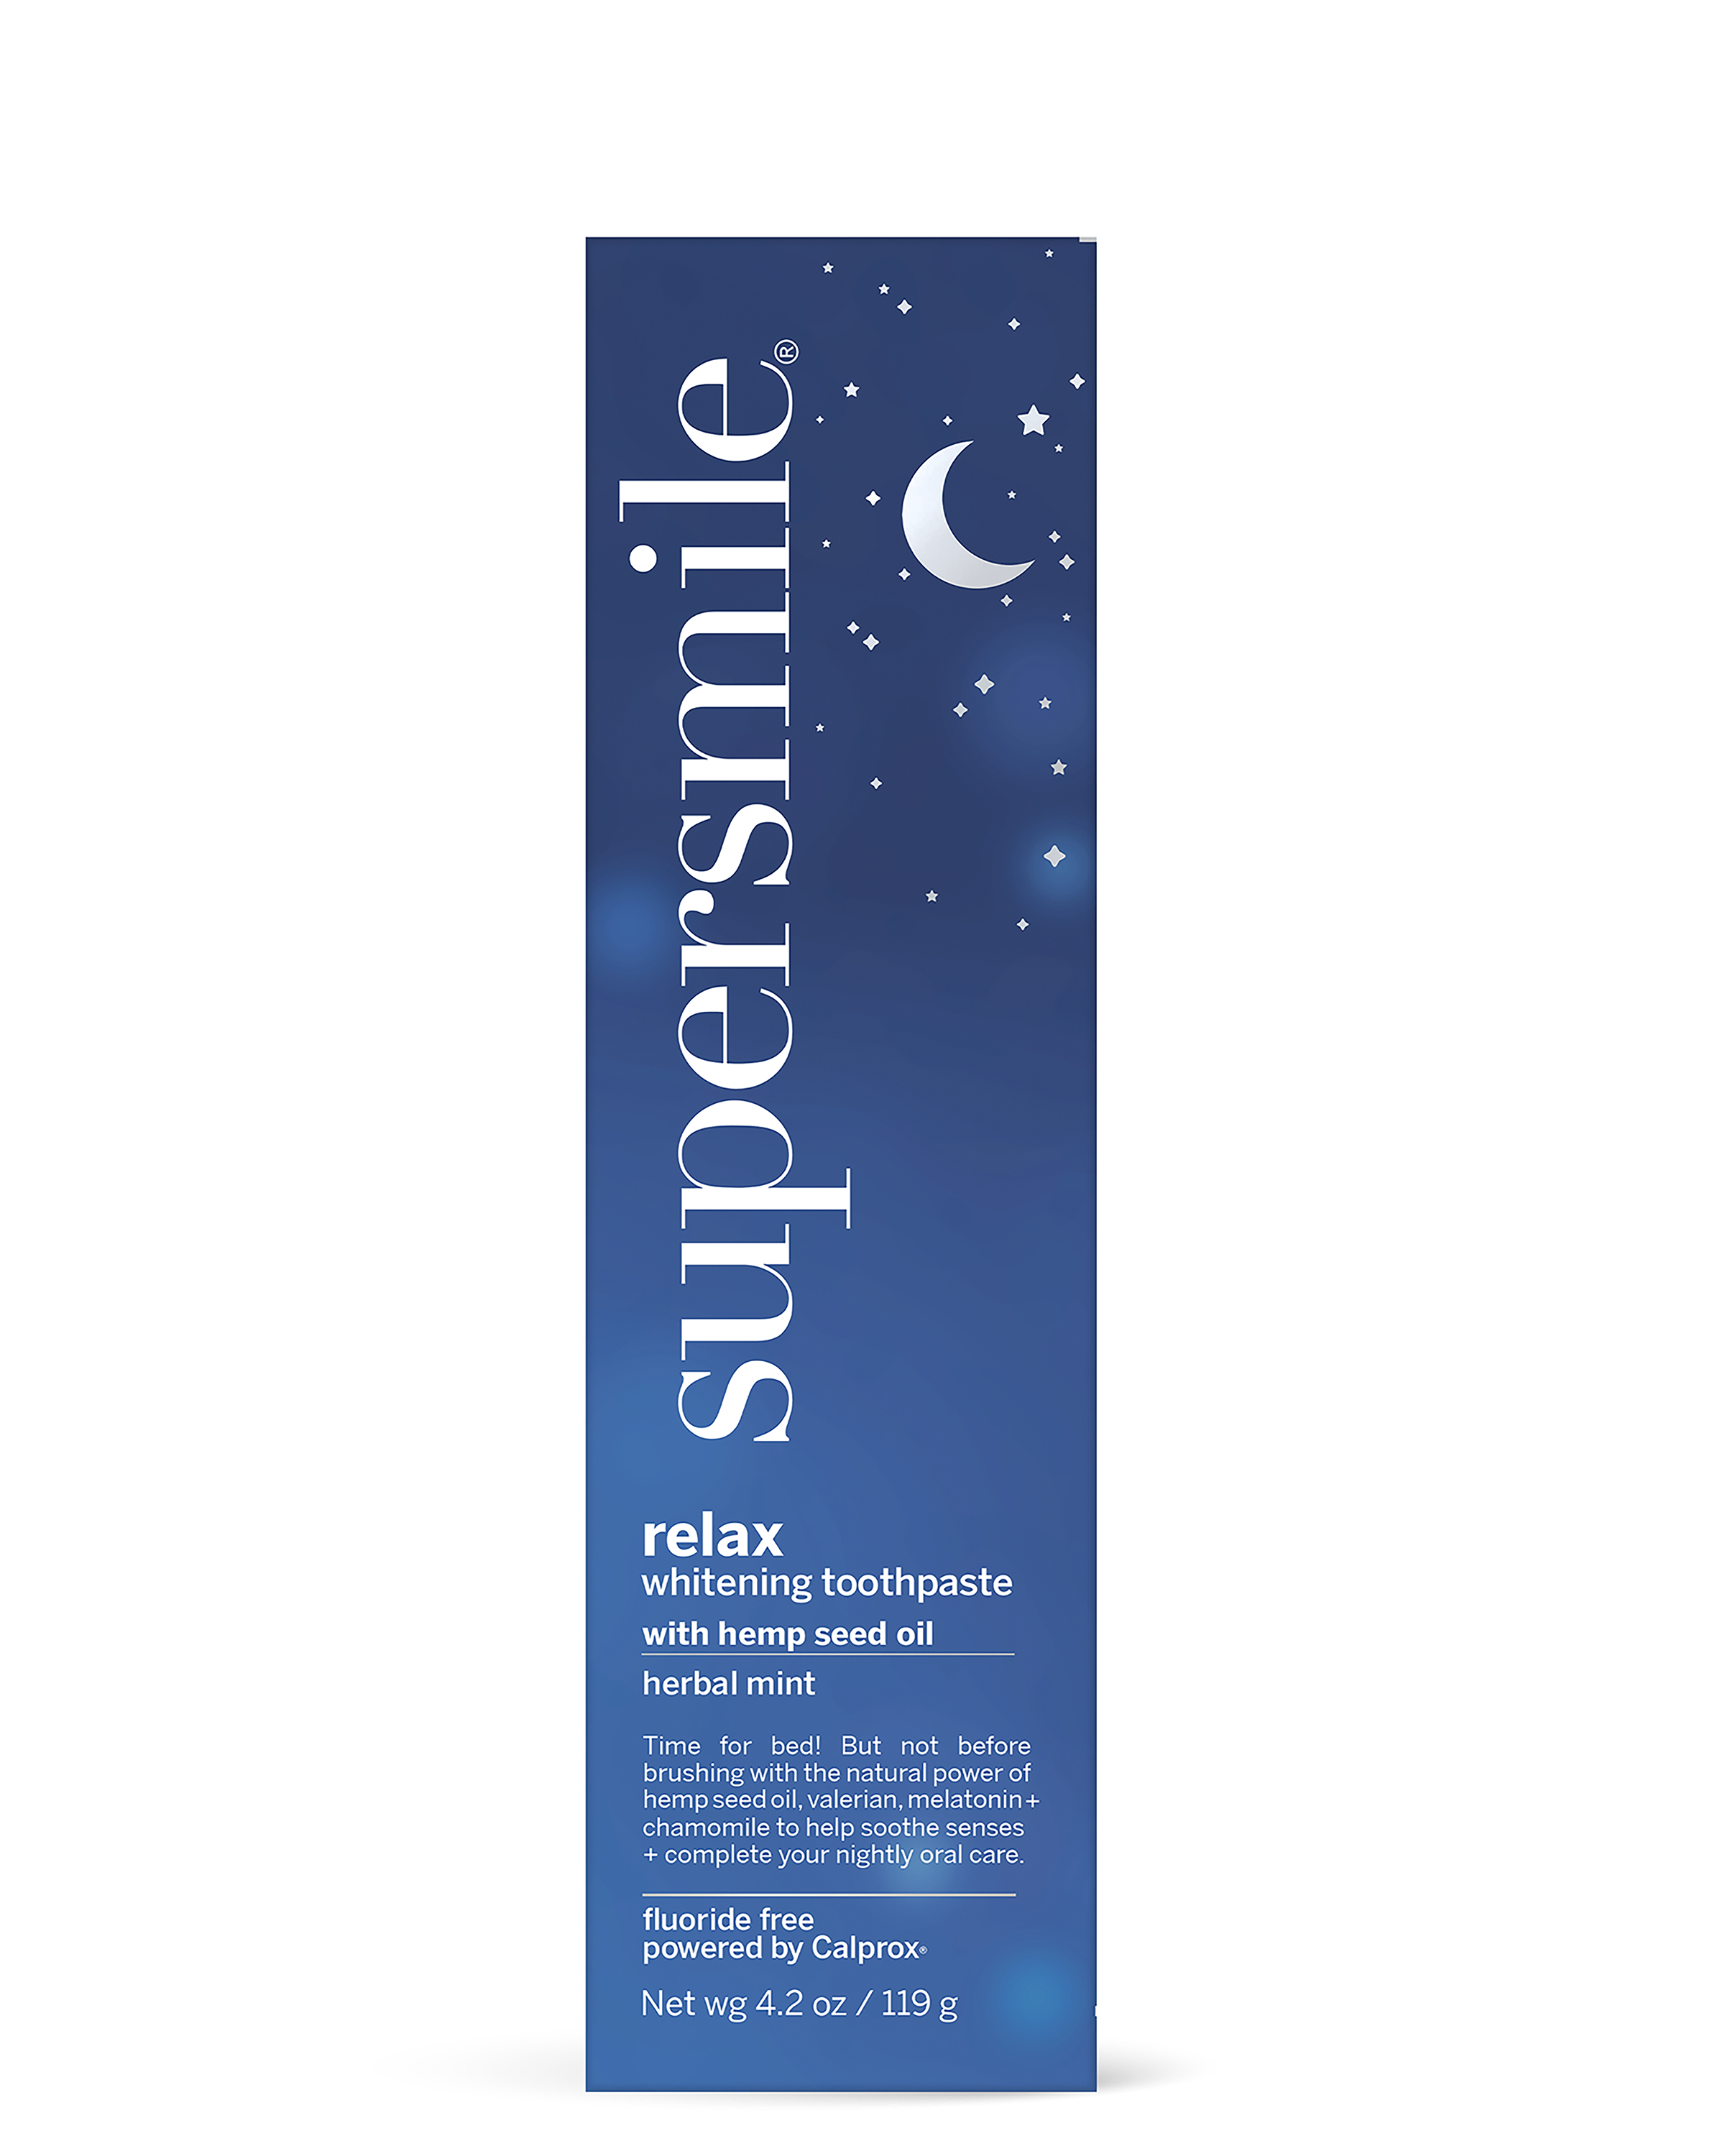 Relax Whitening Toothpaste Box